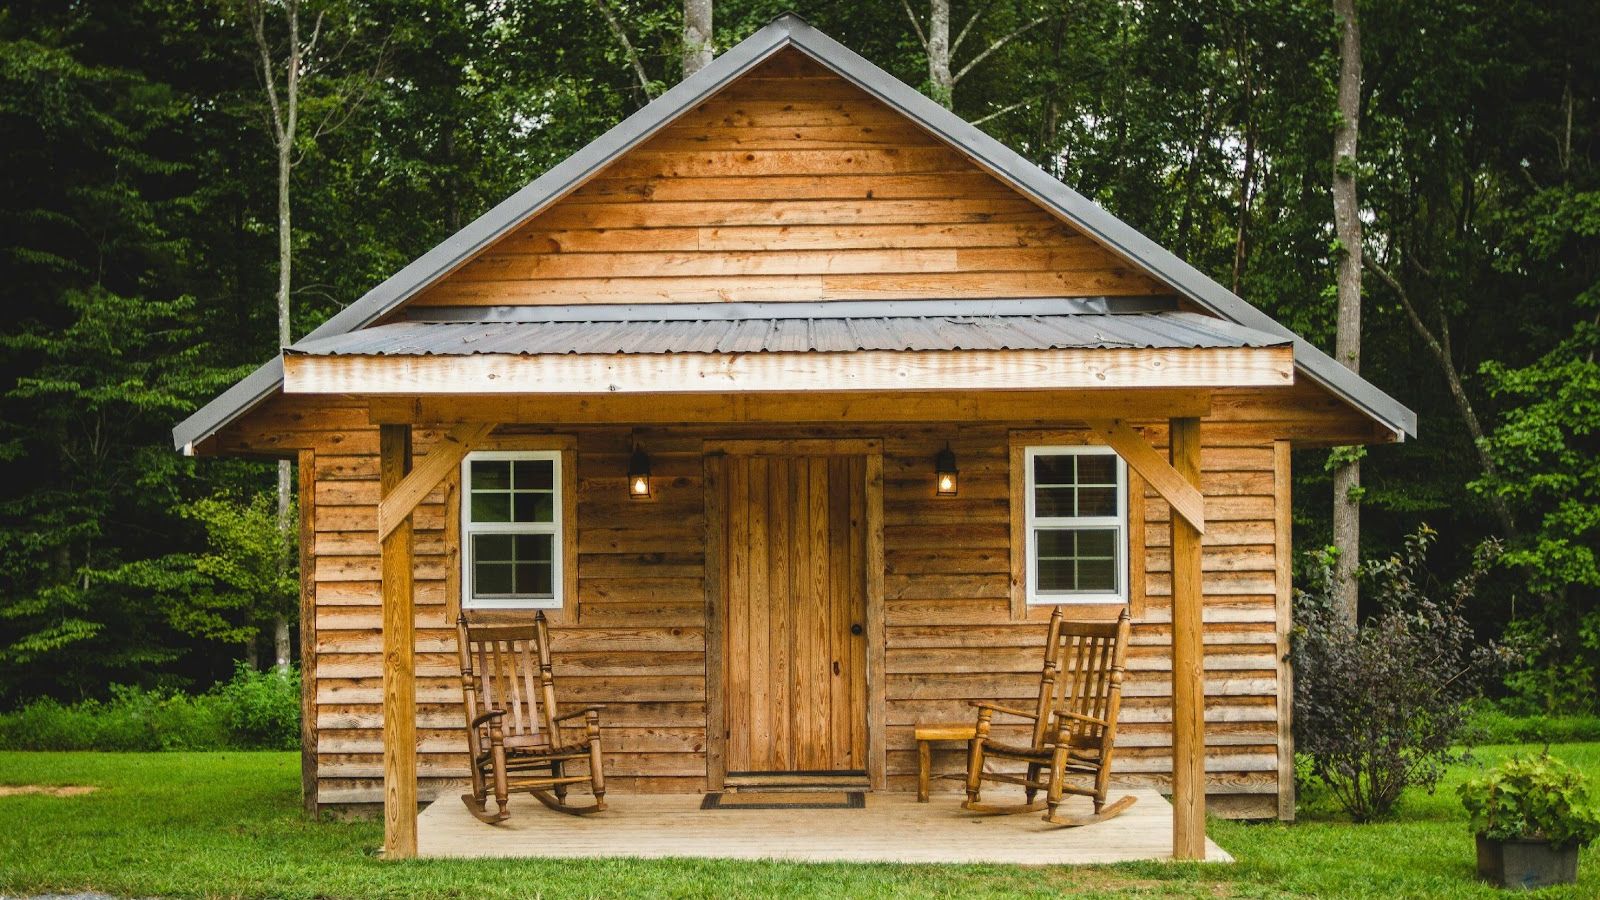 Heating Options for Residential Log Cabins